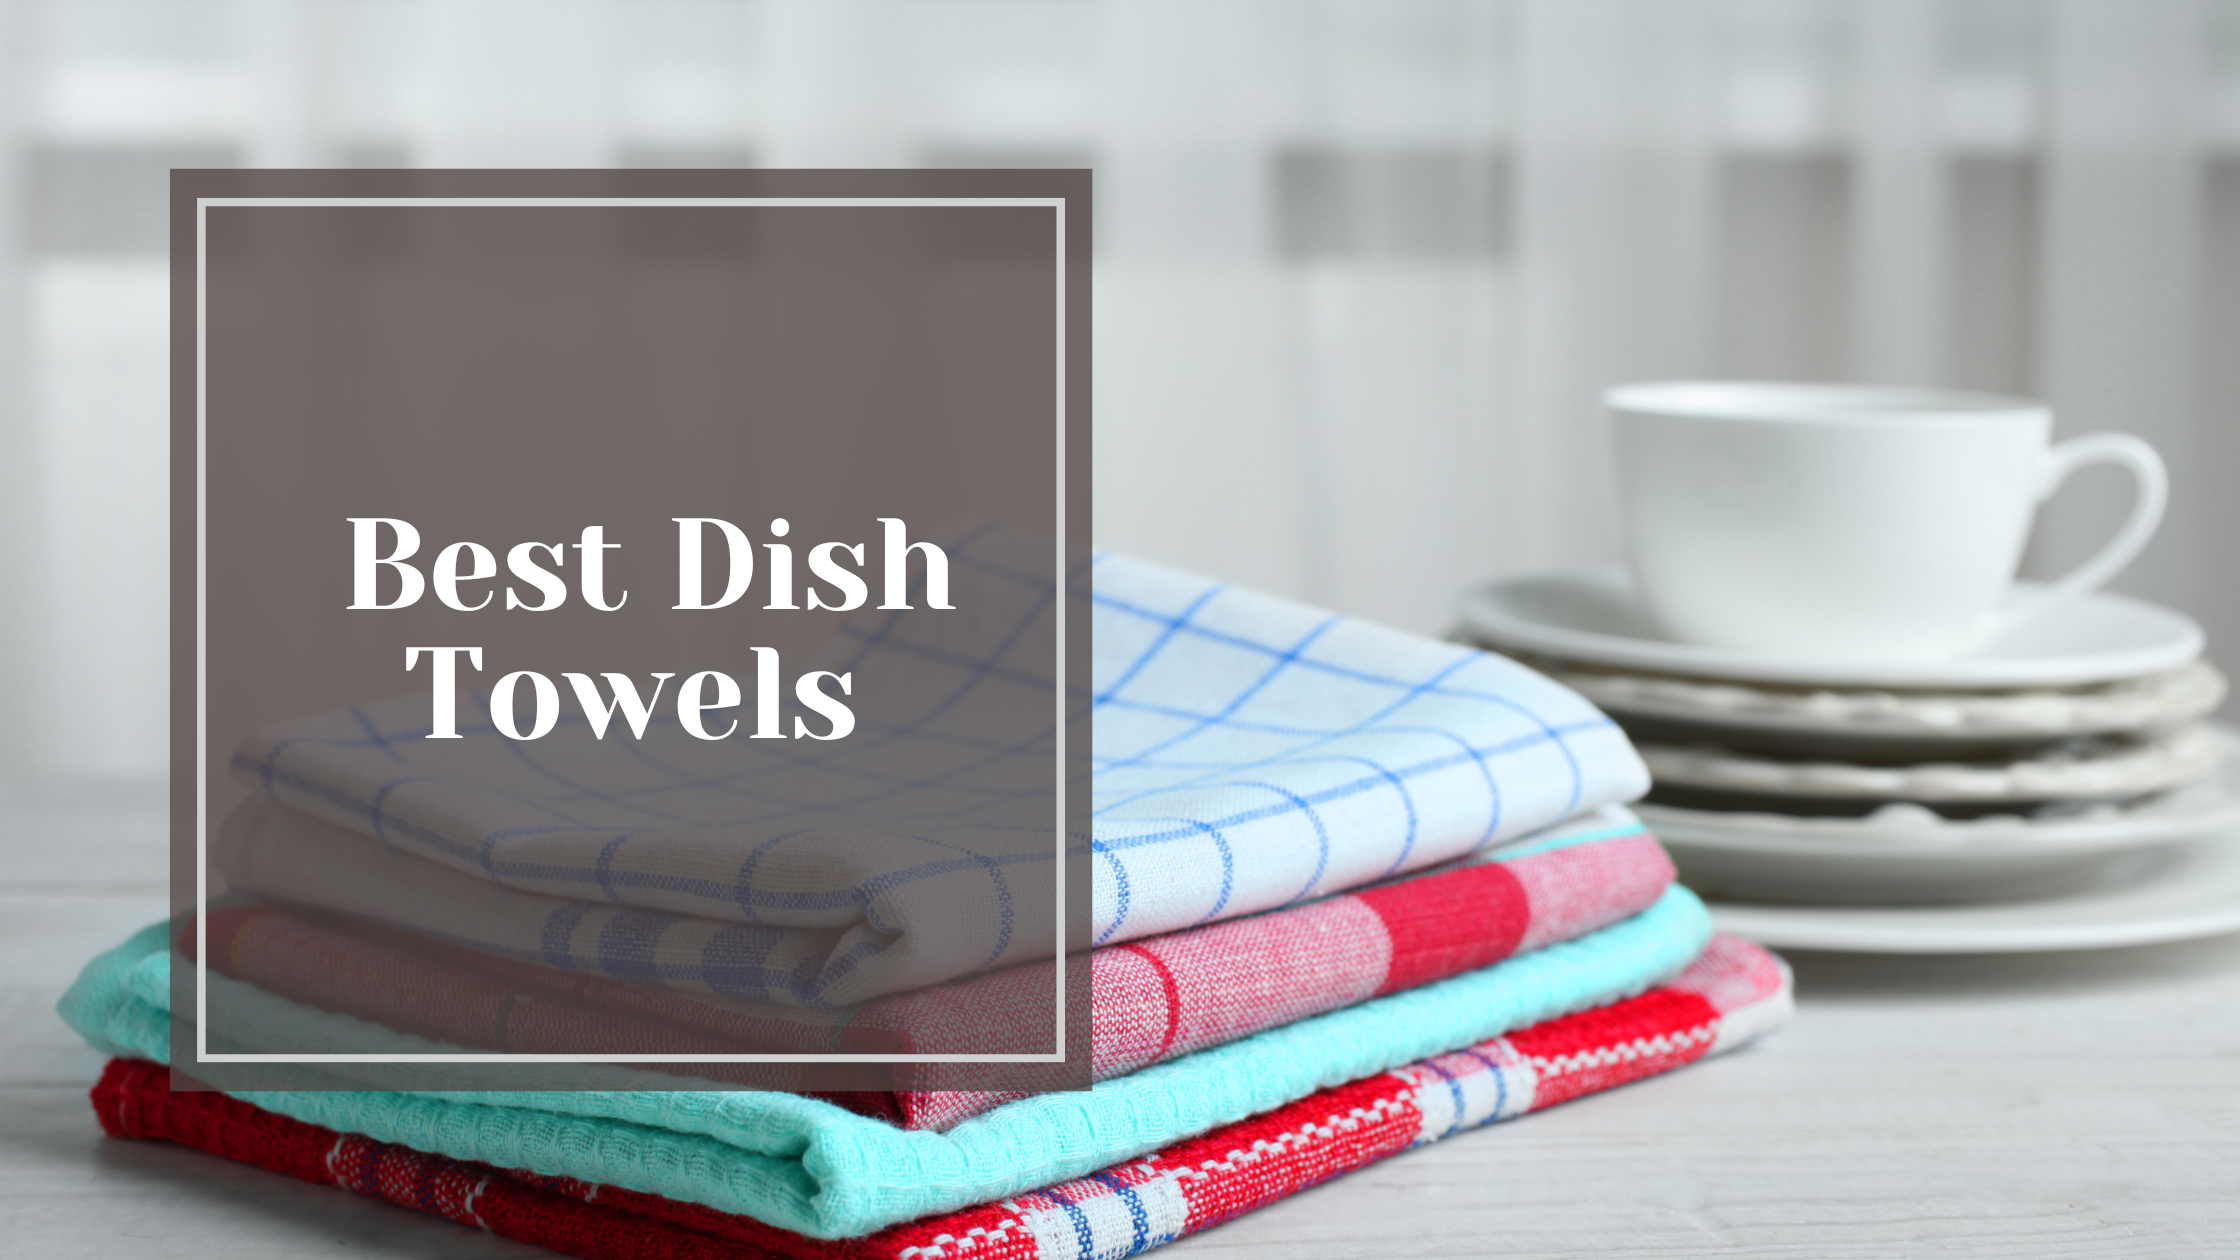 Dish Towels to Dry For - WSJ